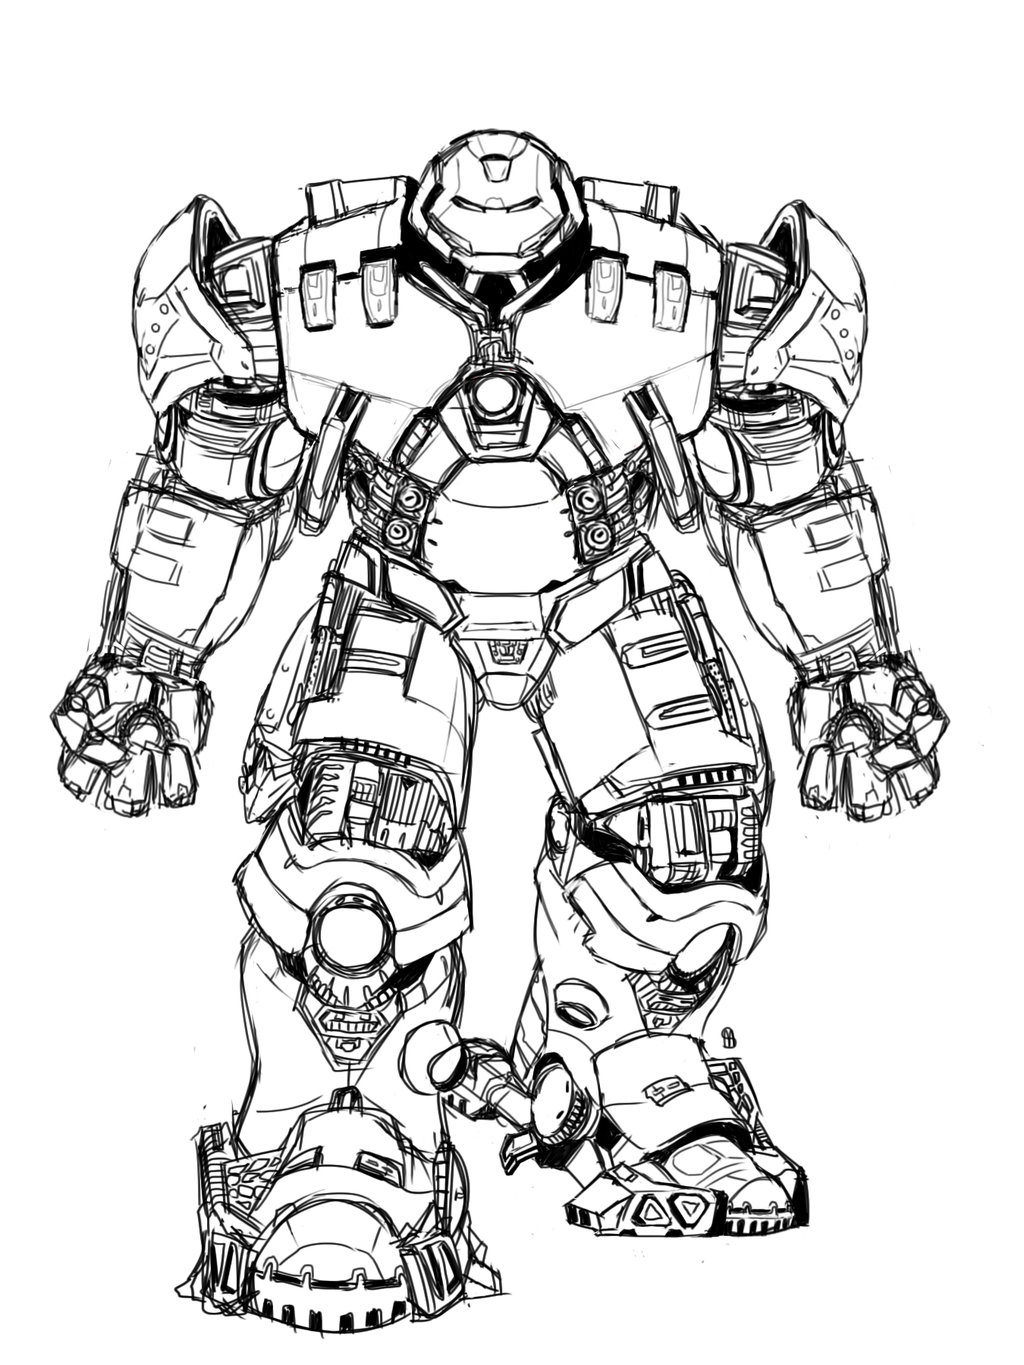 Hulkbuster Coloring Pages - Free Printable Coloring Pages at ...